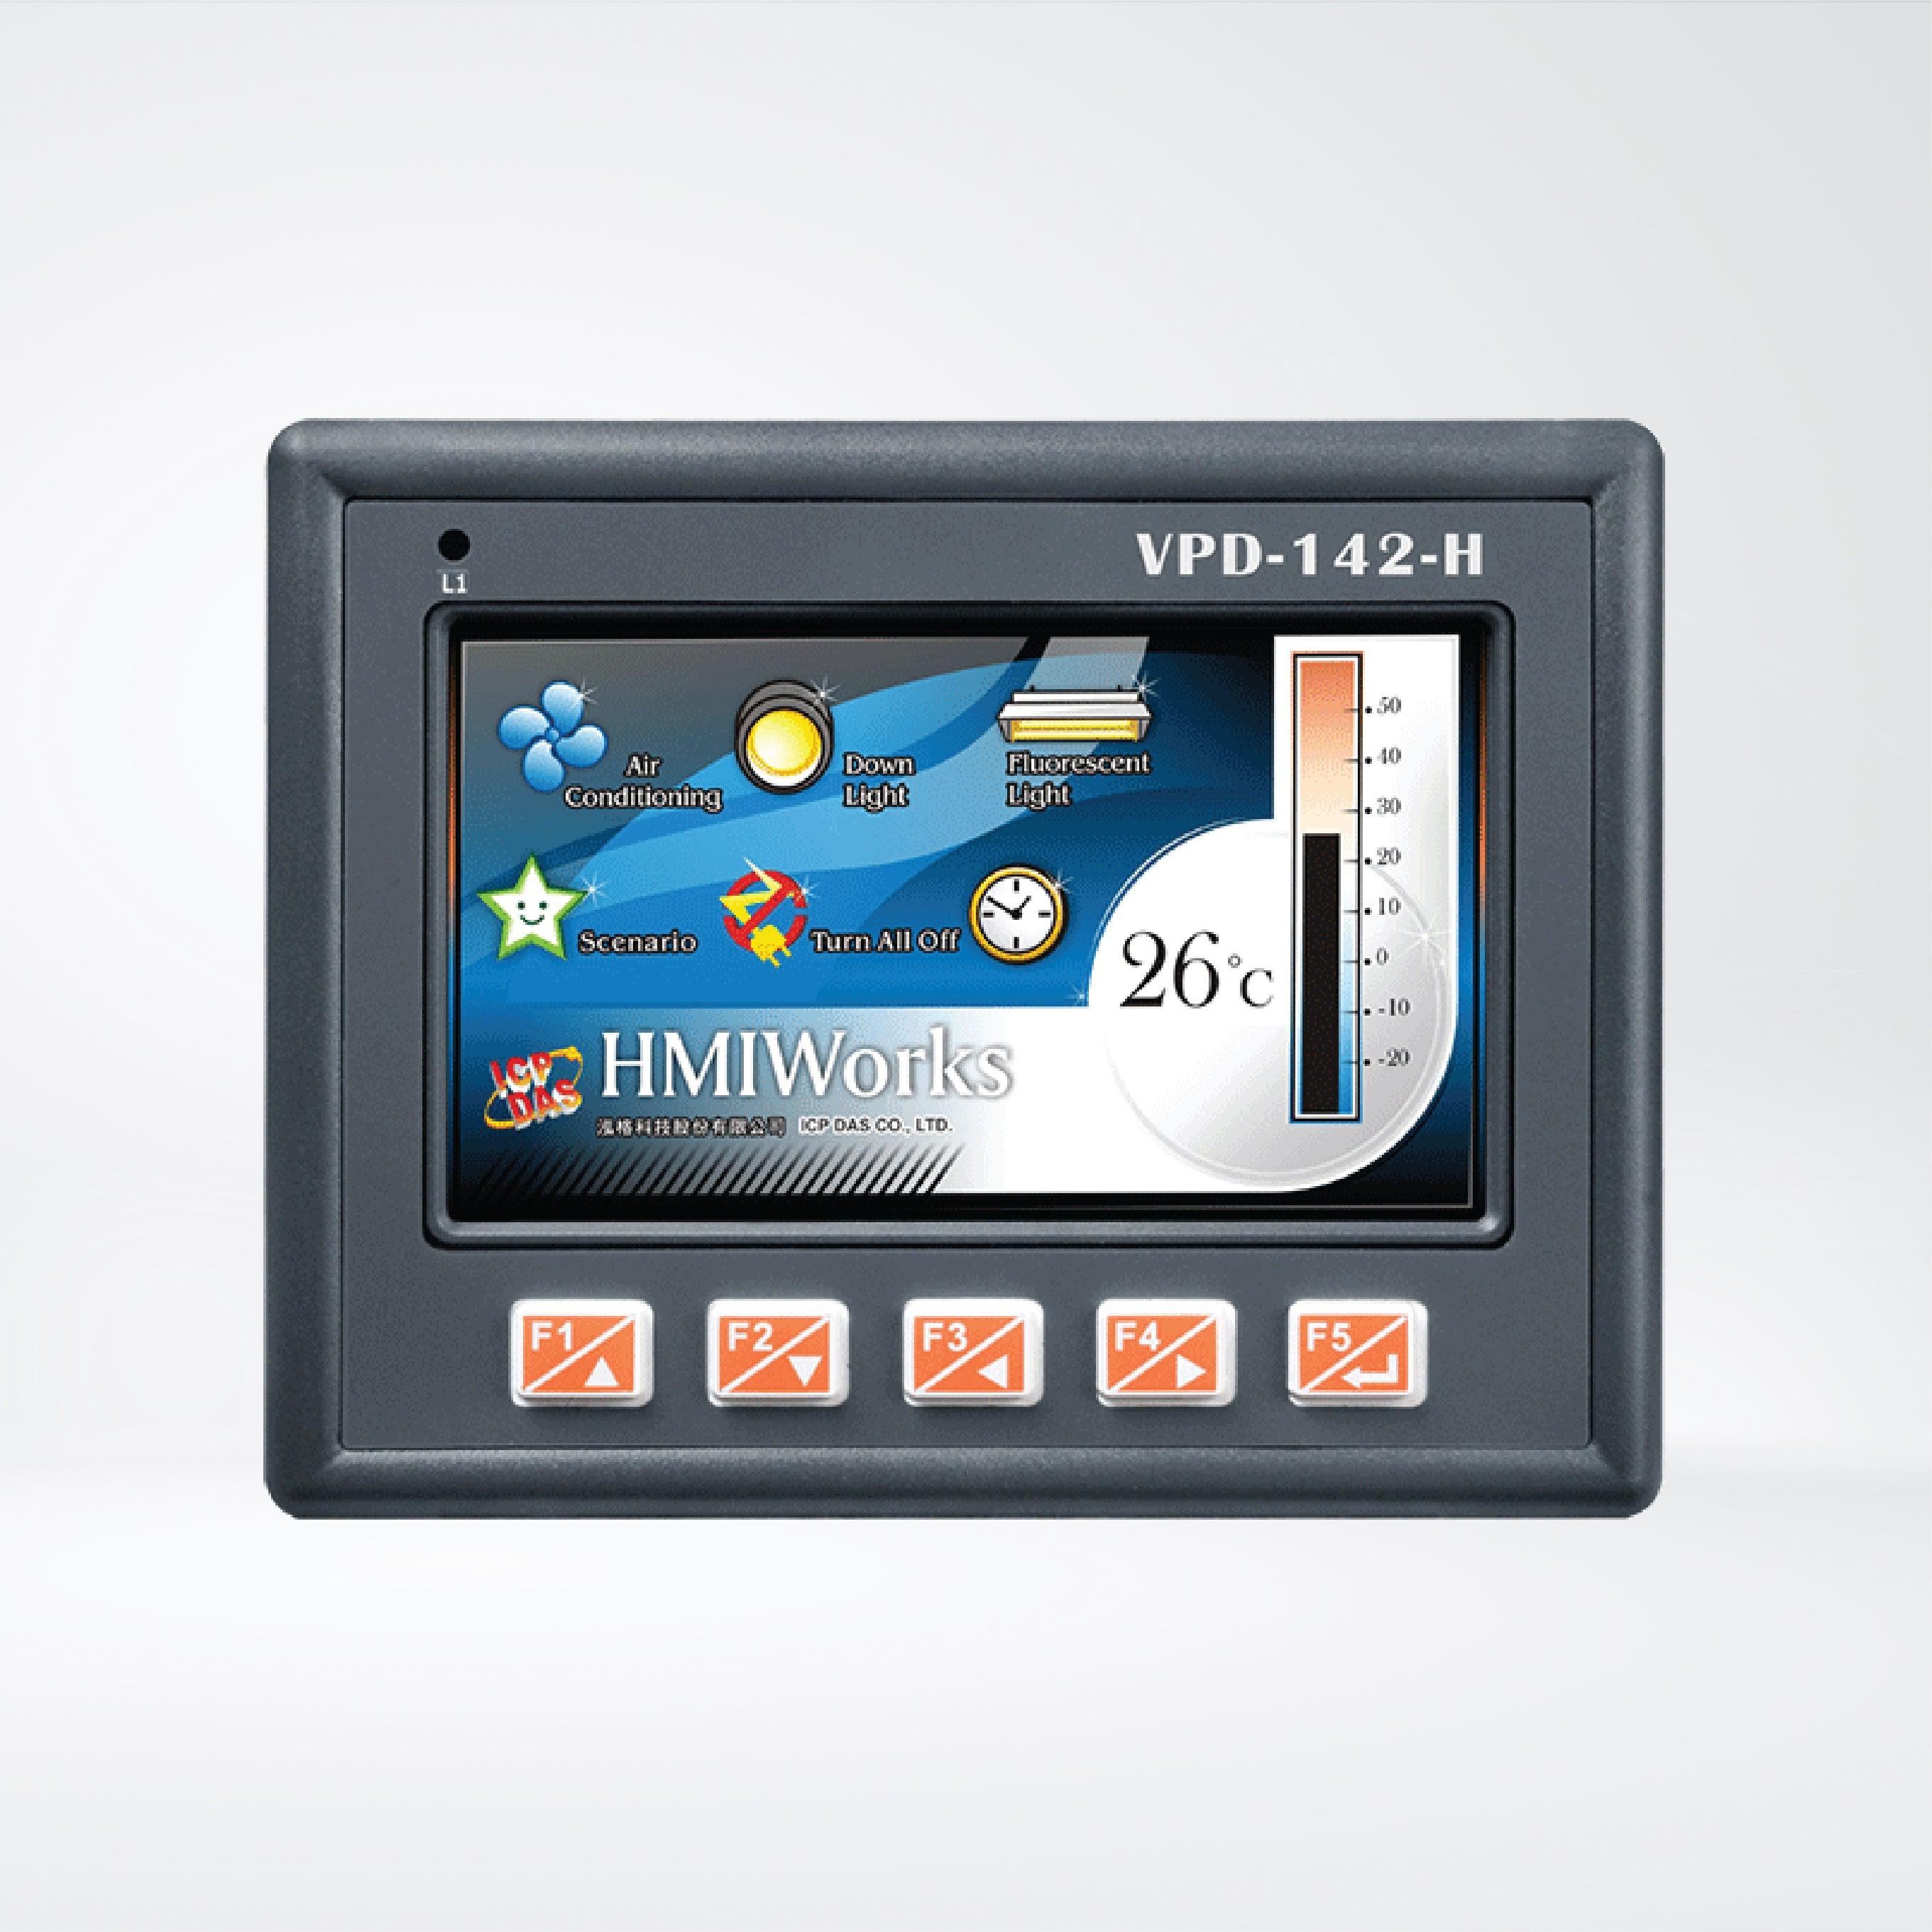 VPD-142-H 4.3" Touch HMI Device with 2 x RS-232/RS-485 and Rubber Keypad - Riverplus